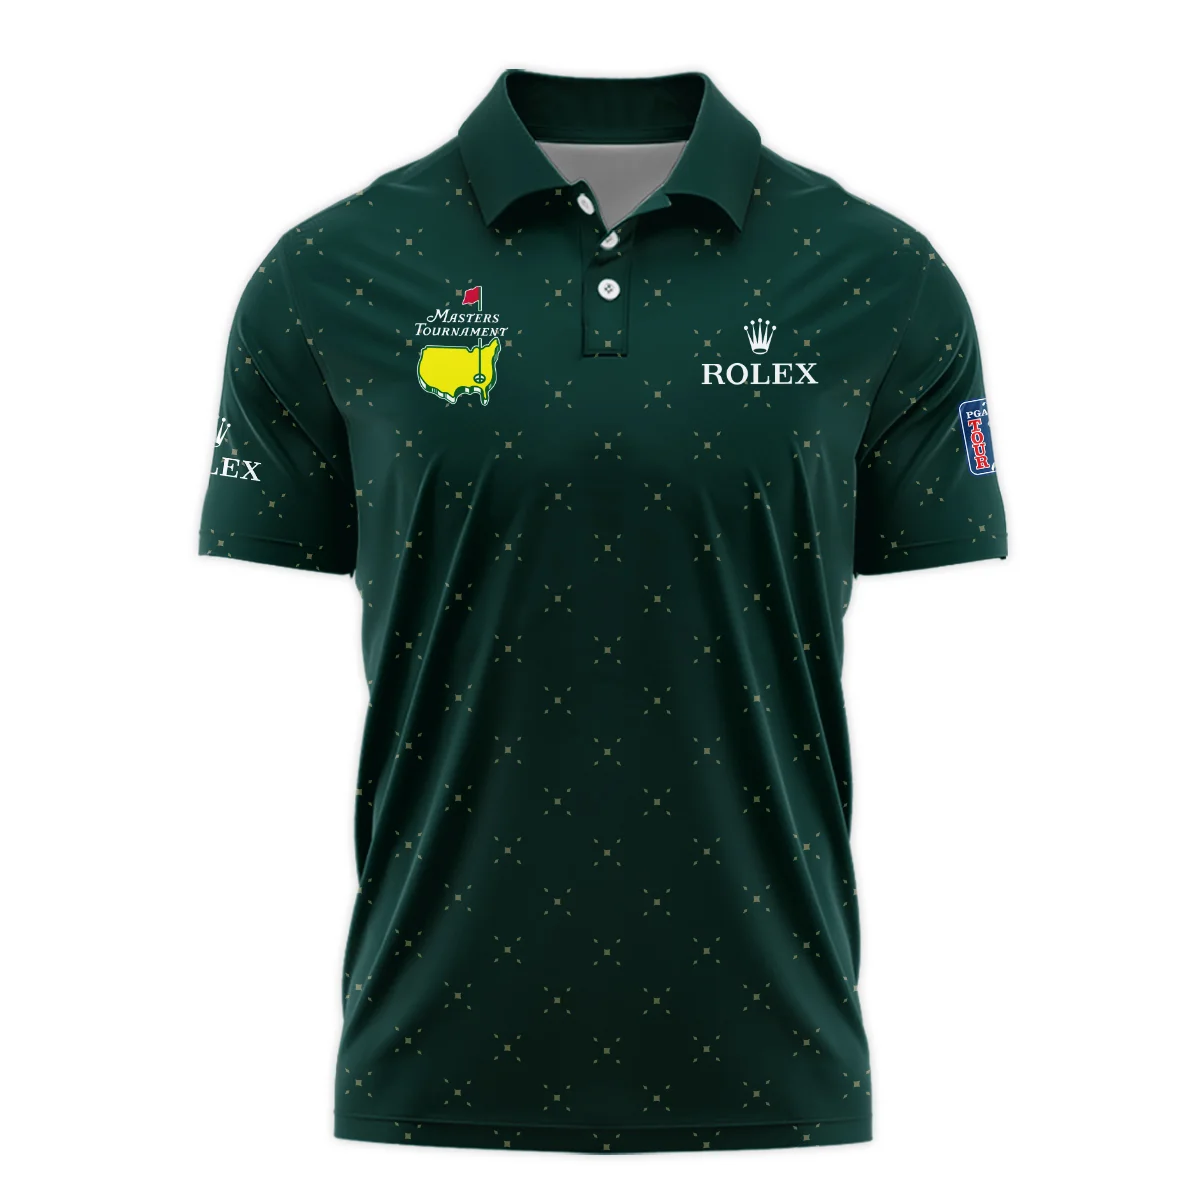 Diamond Shapes With Geometric Pattern Masters Tournament Rolex Polo Shirt Style Classic Polo Shirt For Men